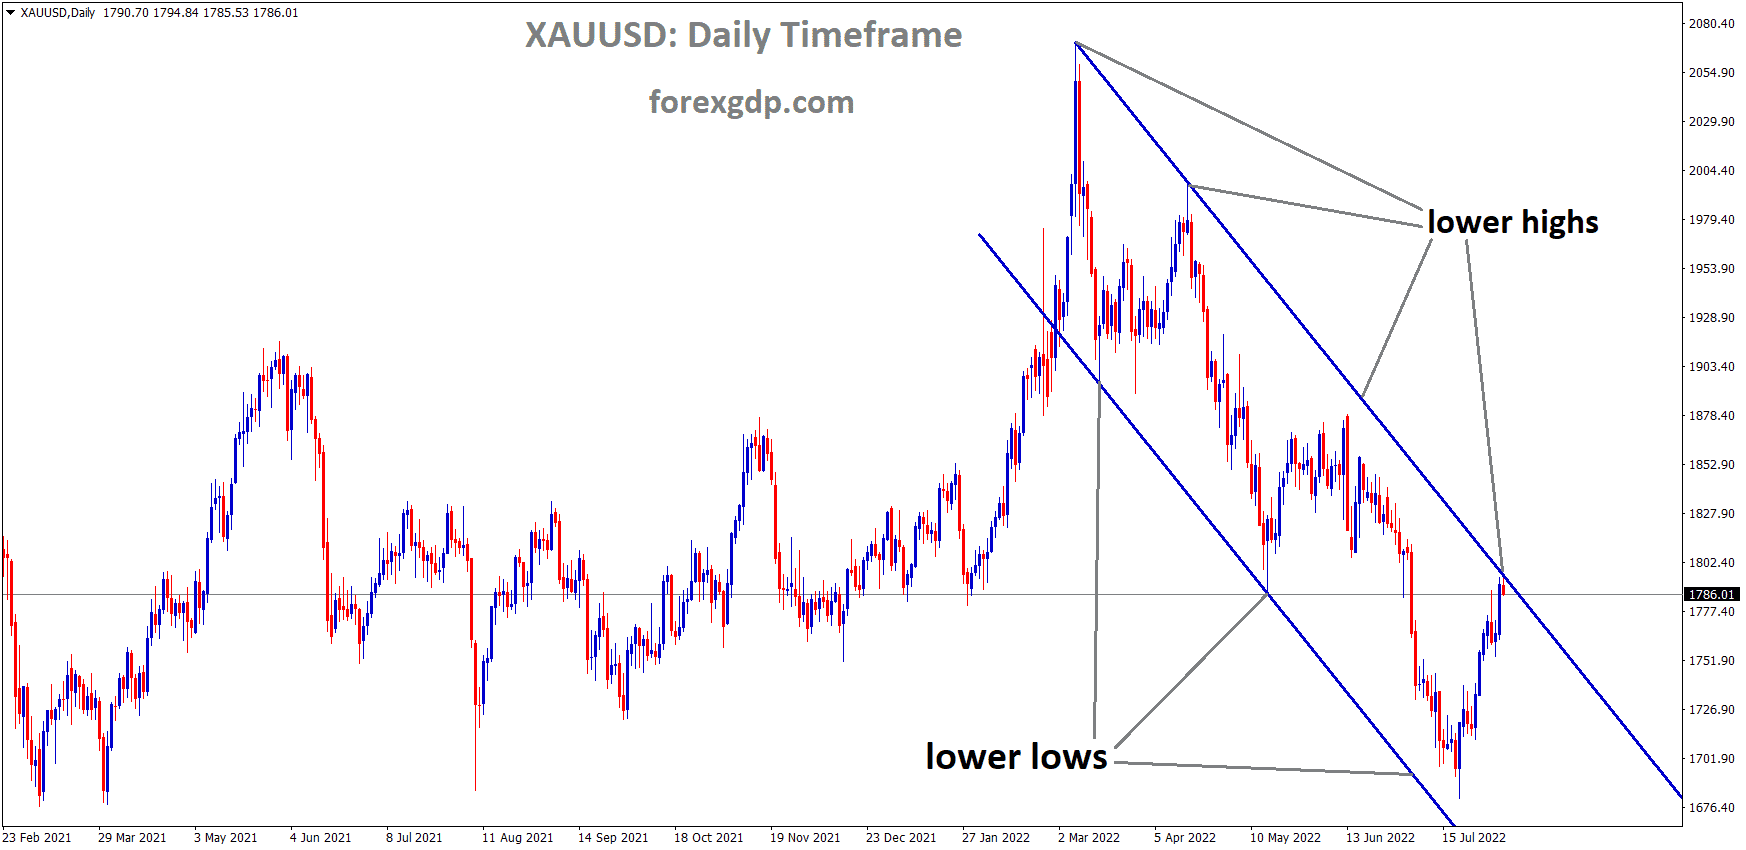 XAUUSD Gold price is moving in the Descending channel and the market has reached the Lower high area of the channel